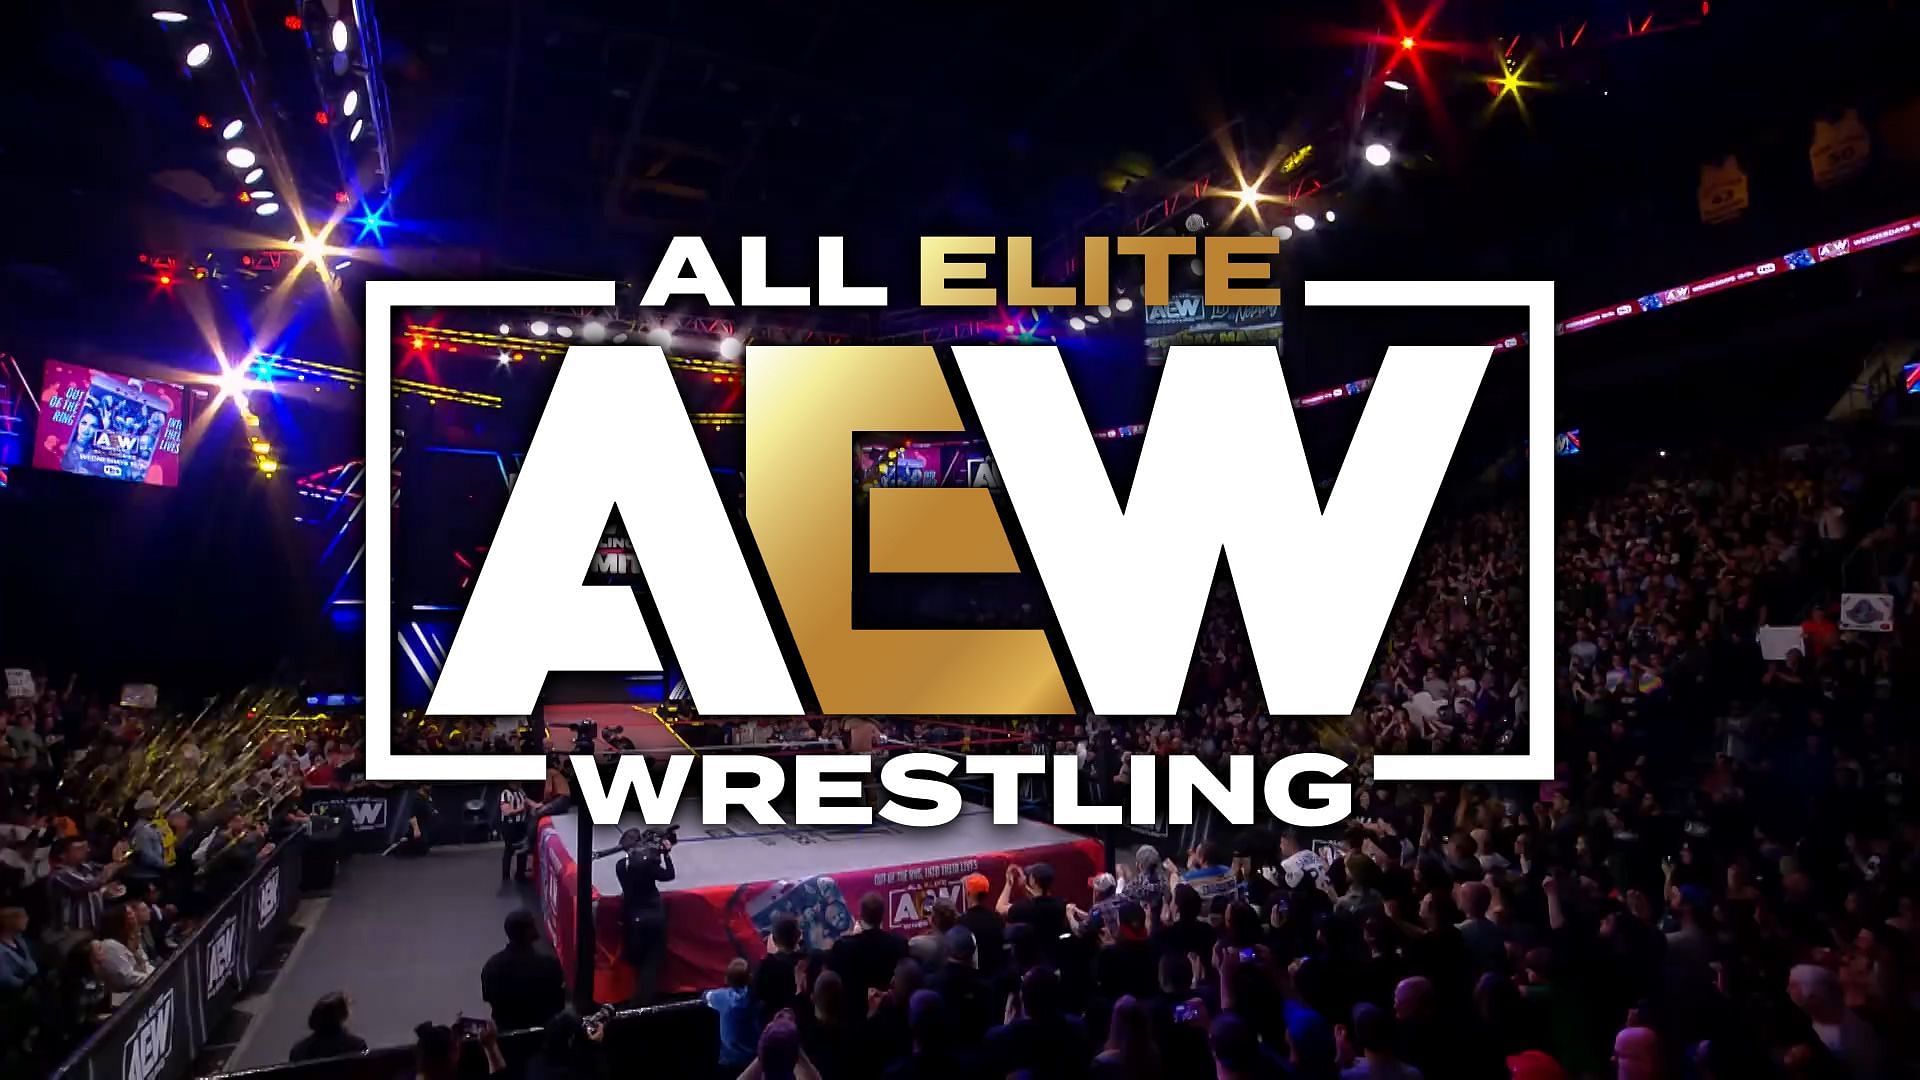 All Elite Wrestling has one of the most stacked rosters in wrestling